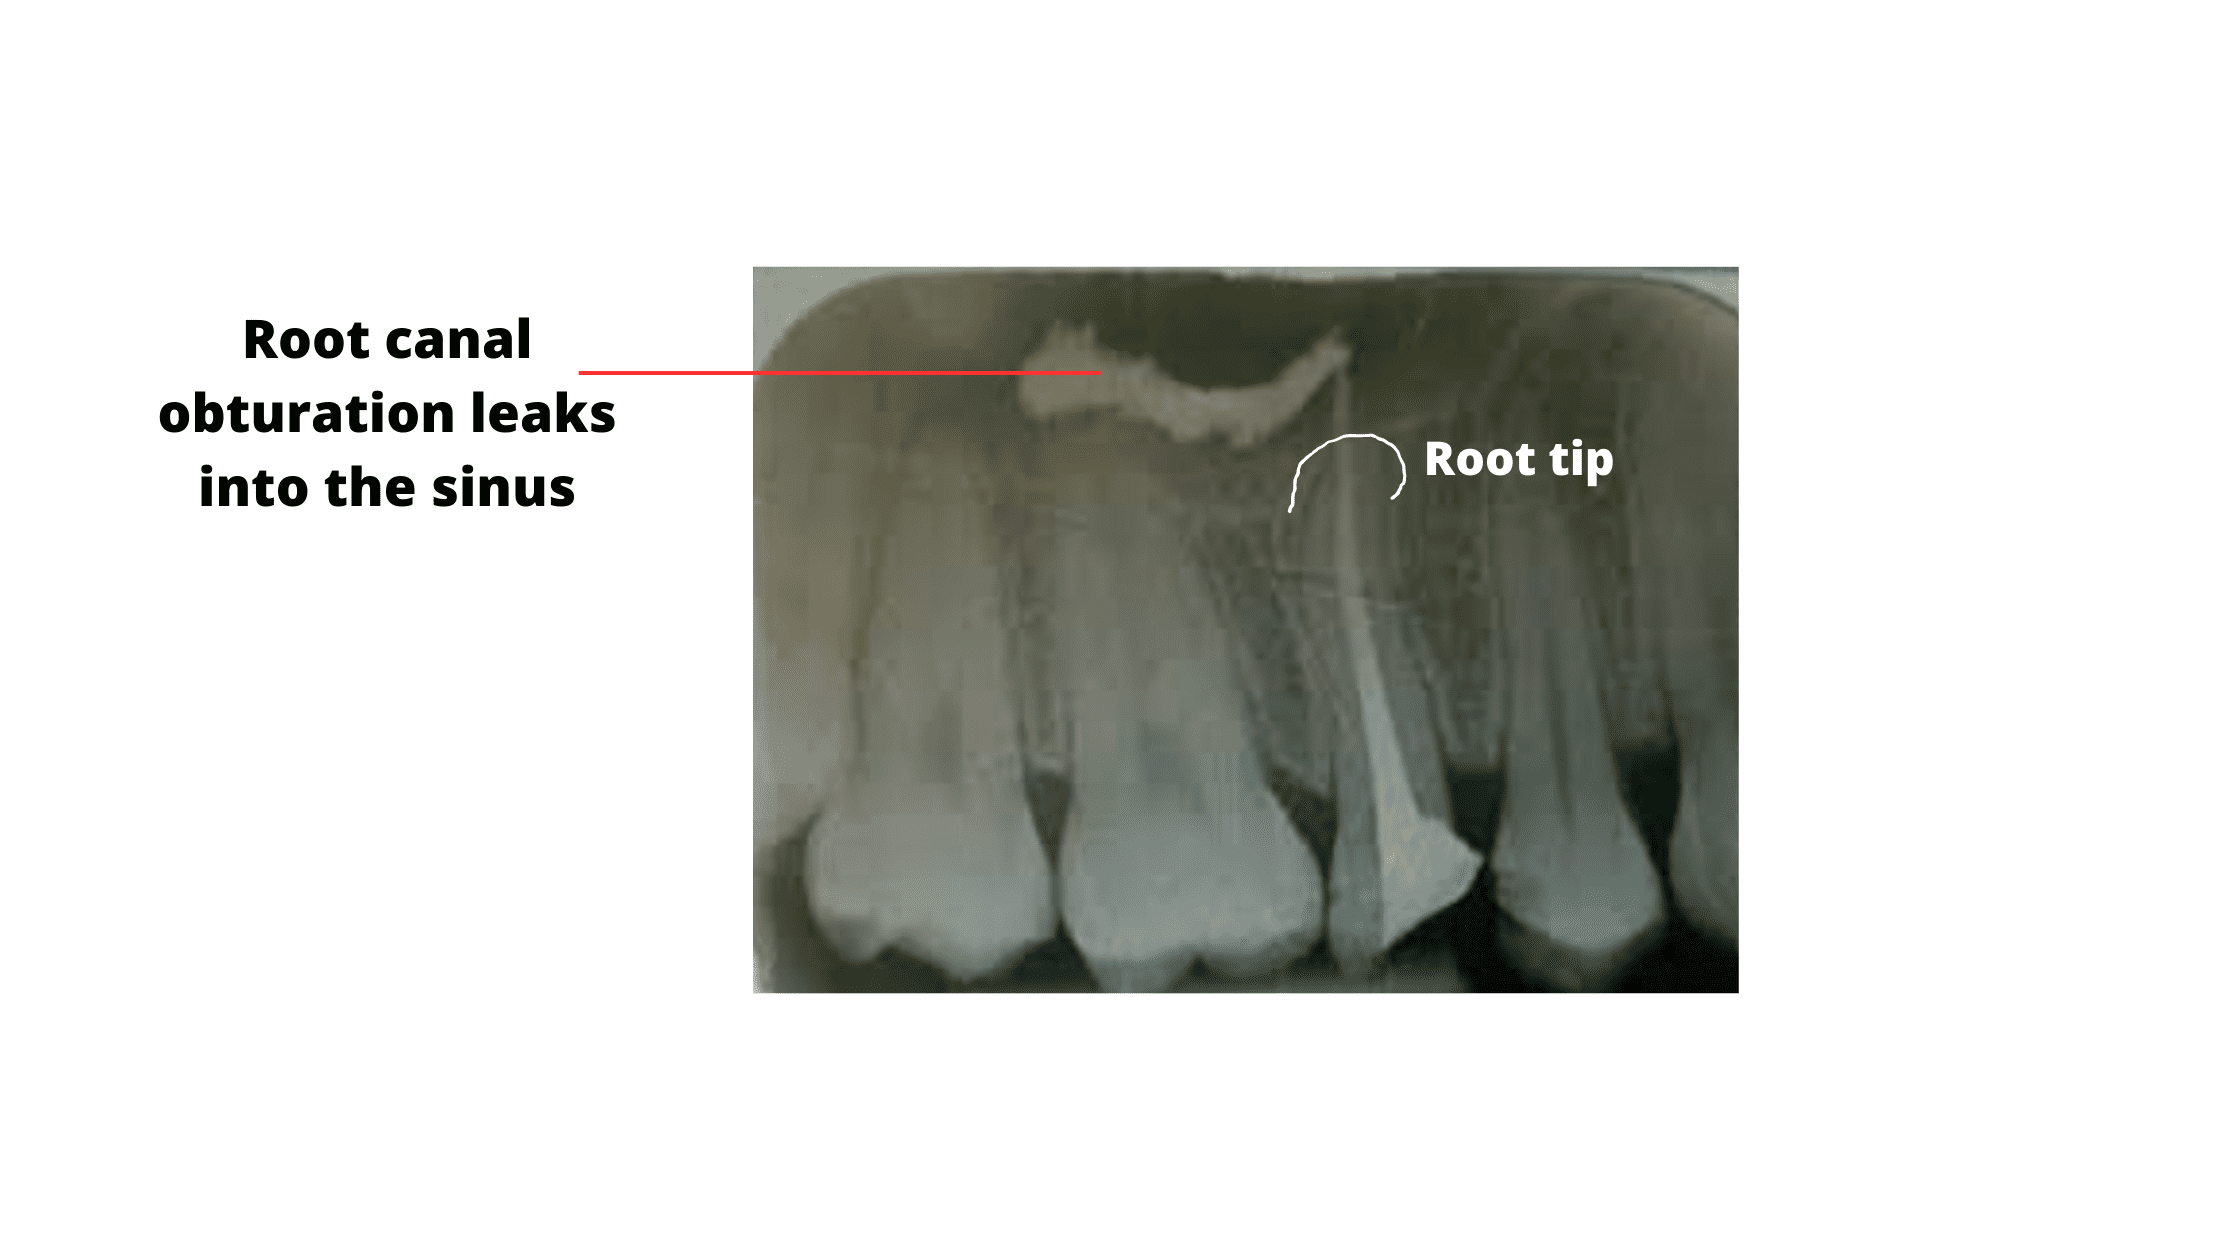 Leakage of the root canal filling into the sinus